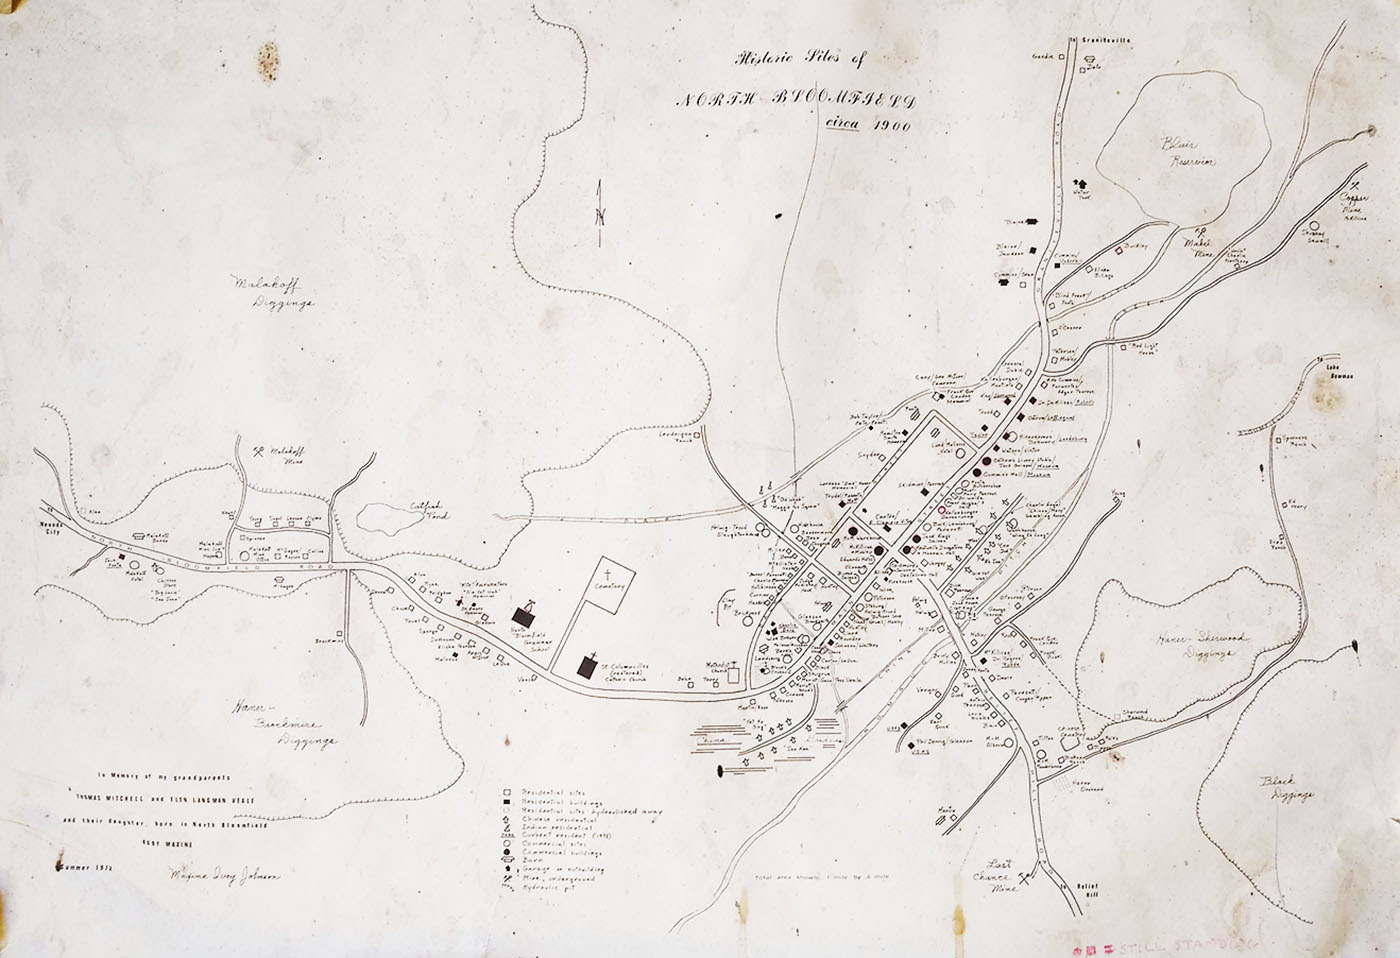 North Bloomfield map circa 1900 with updates1